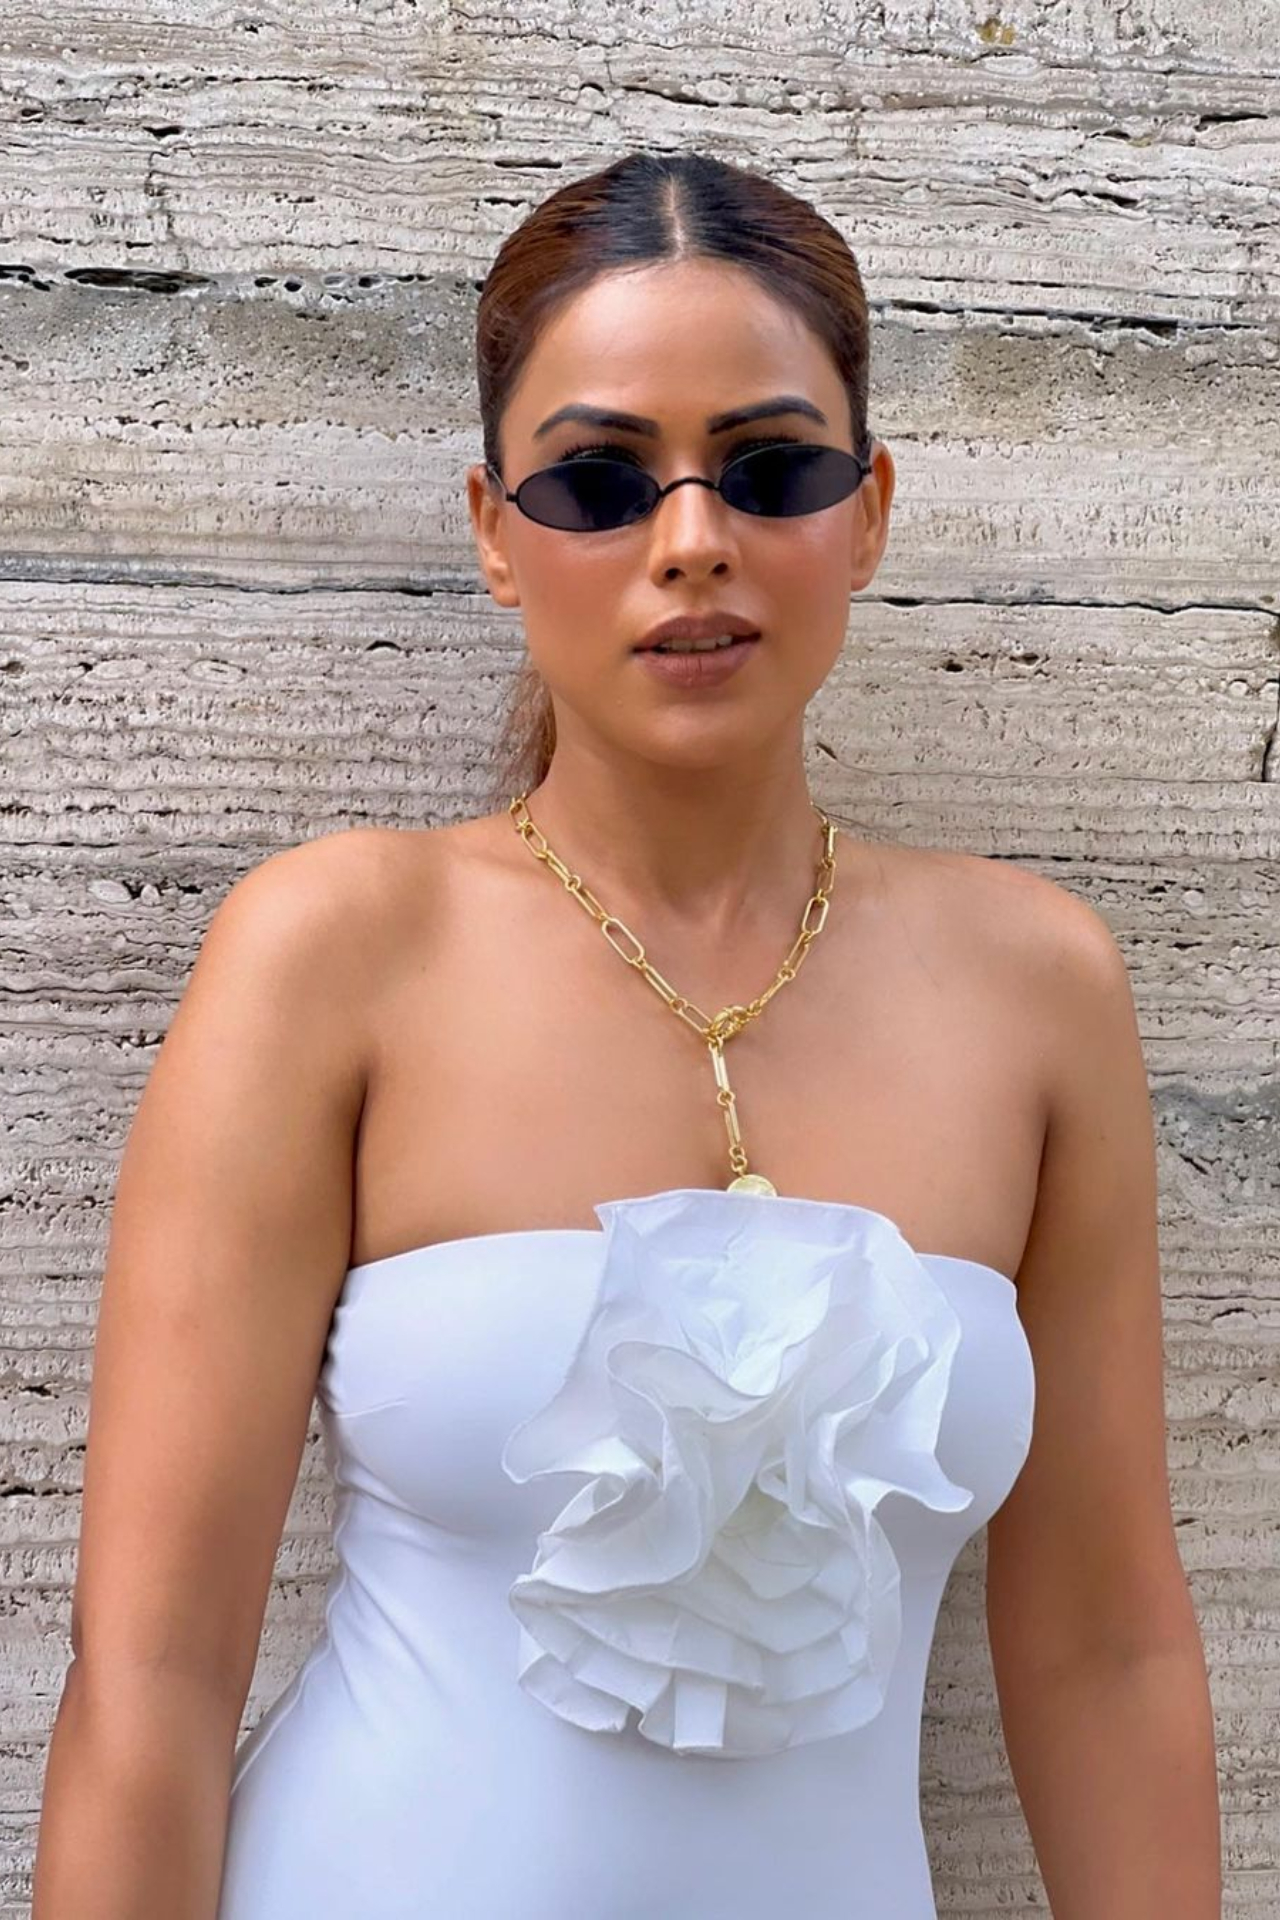 Nia looks ravishing in the white off-shoulder outfit. She finished her look with a pair of black cat-eye sunglasses.